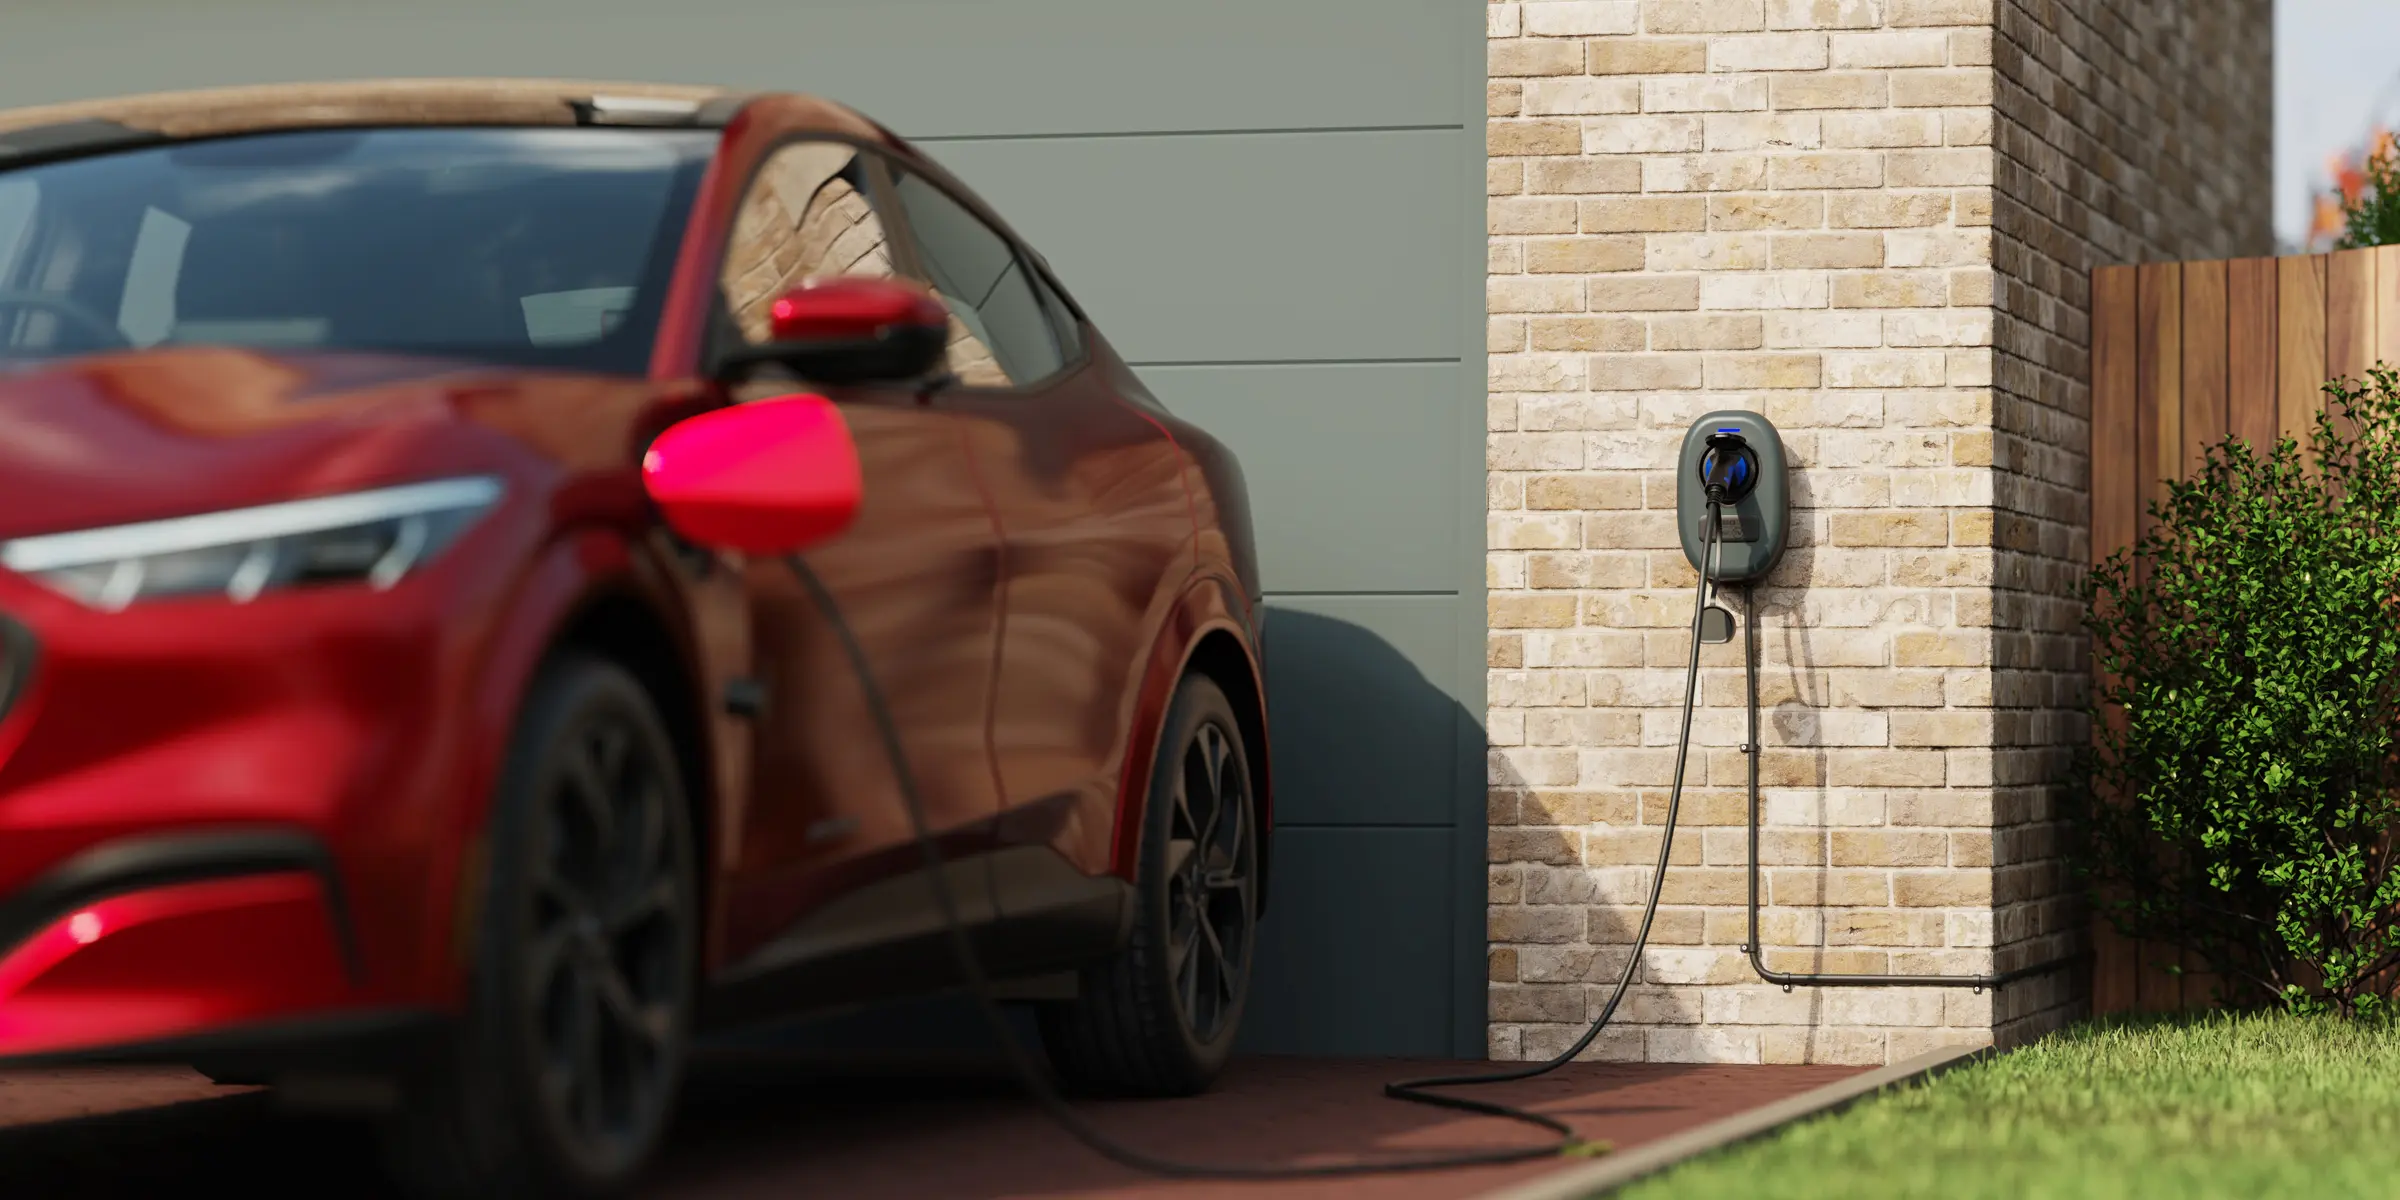 Electric Vehicle charging point installers